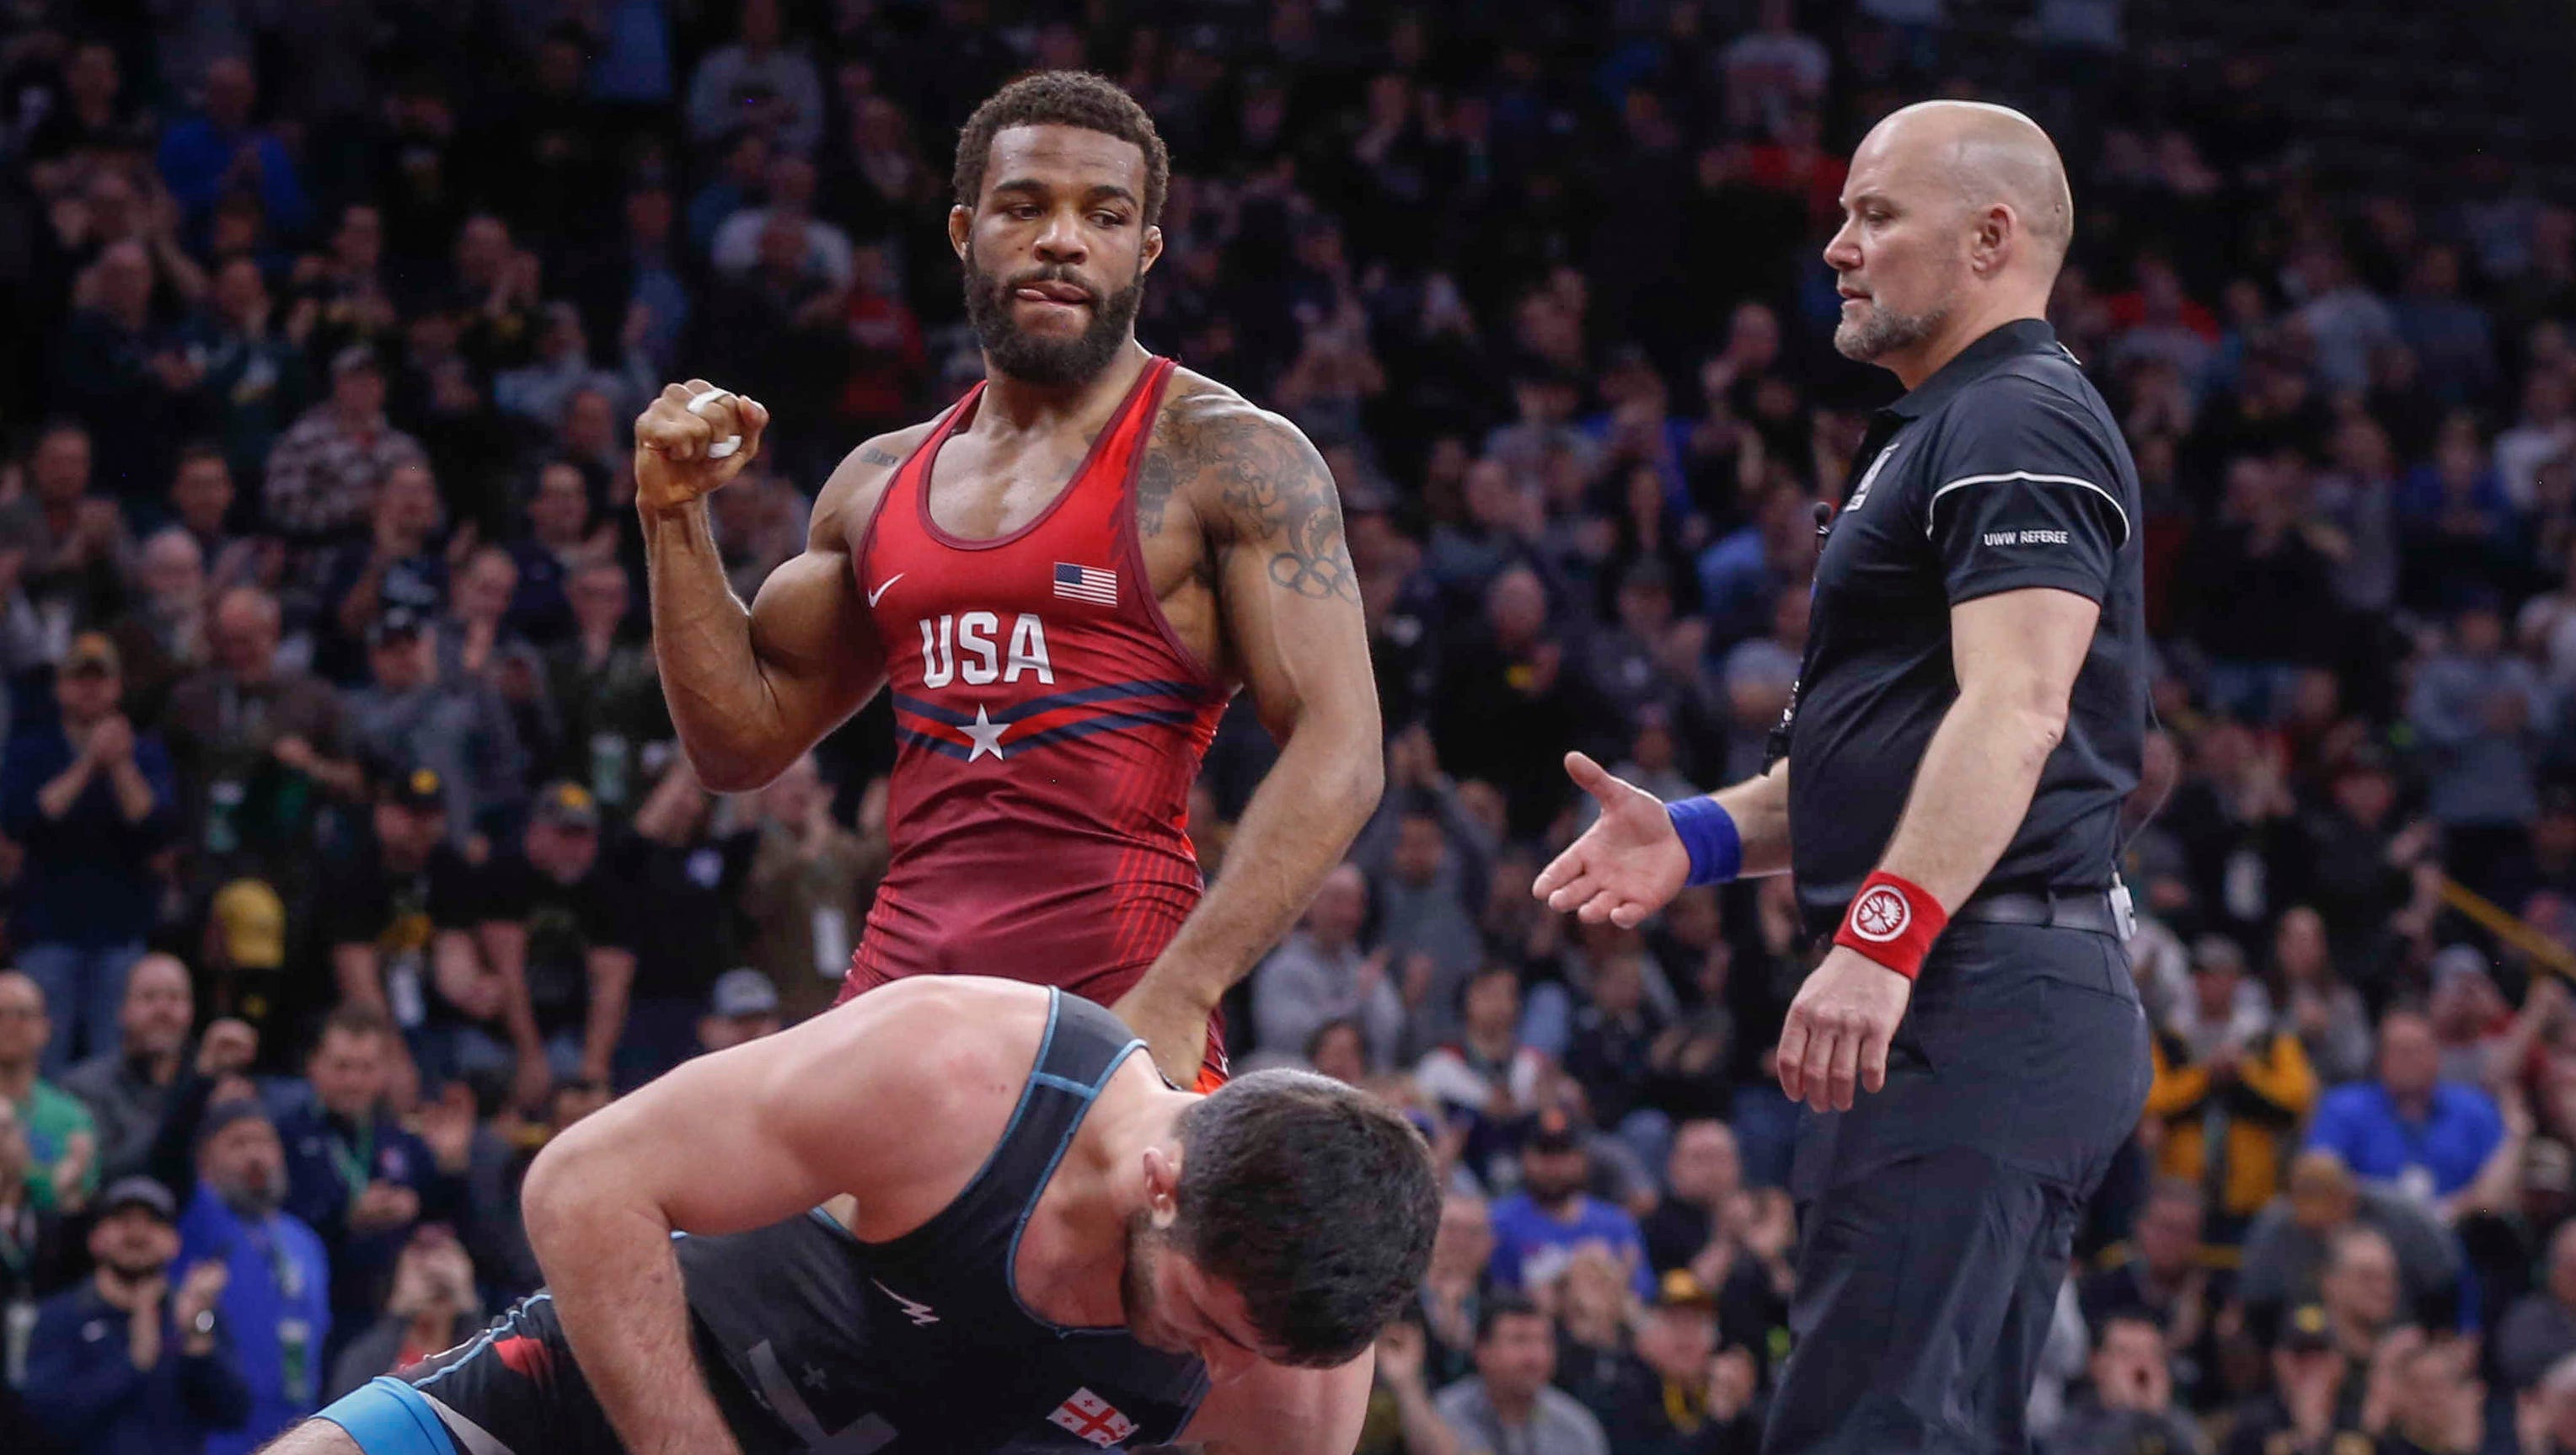 USA Wrestling hosts national championships during COVID19 pandemic